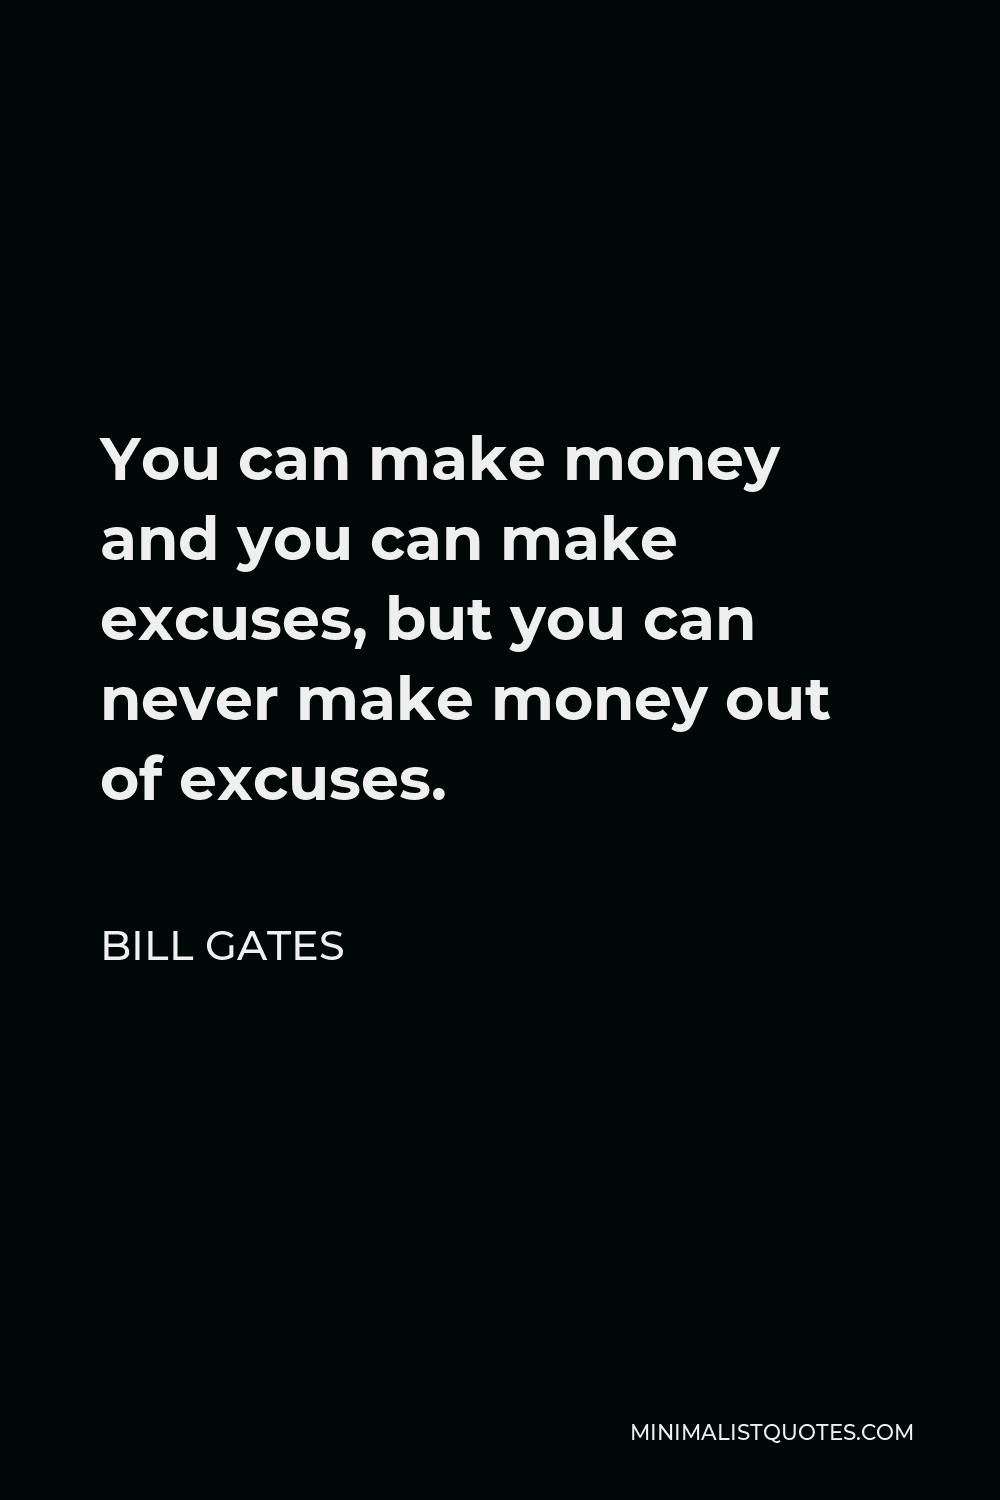 Bill Gates Quote - You can make money and you can make excuses, but you can never make money out of excuses.